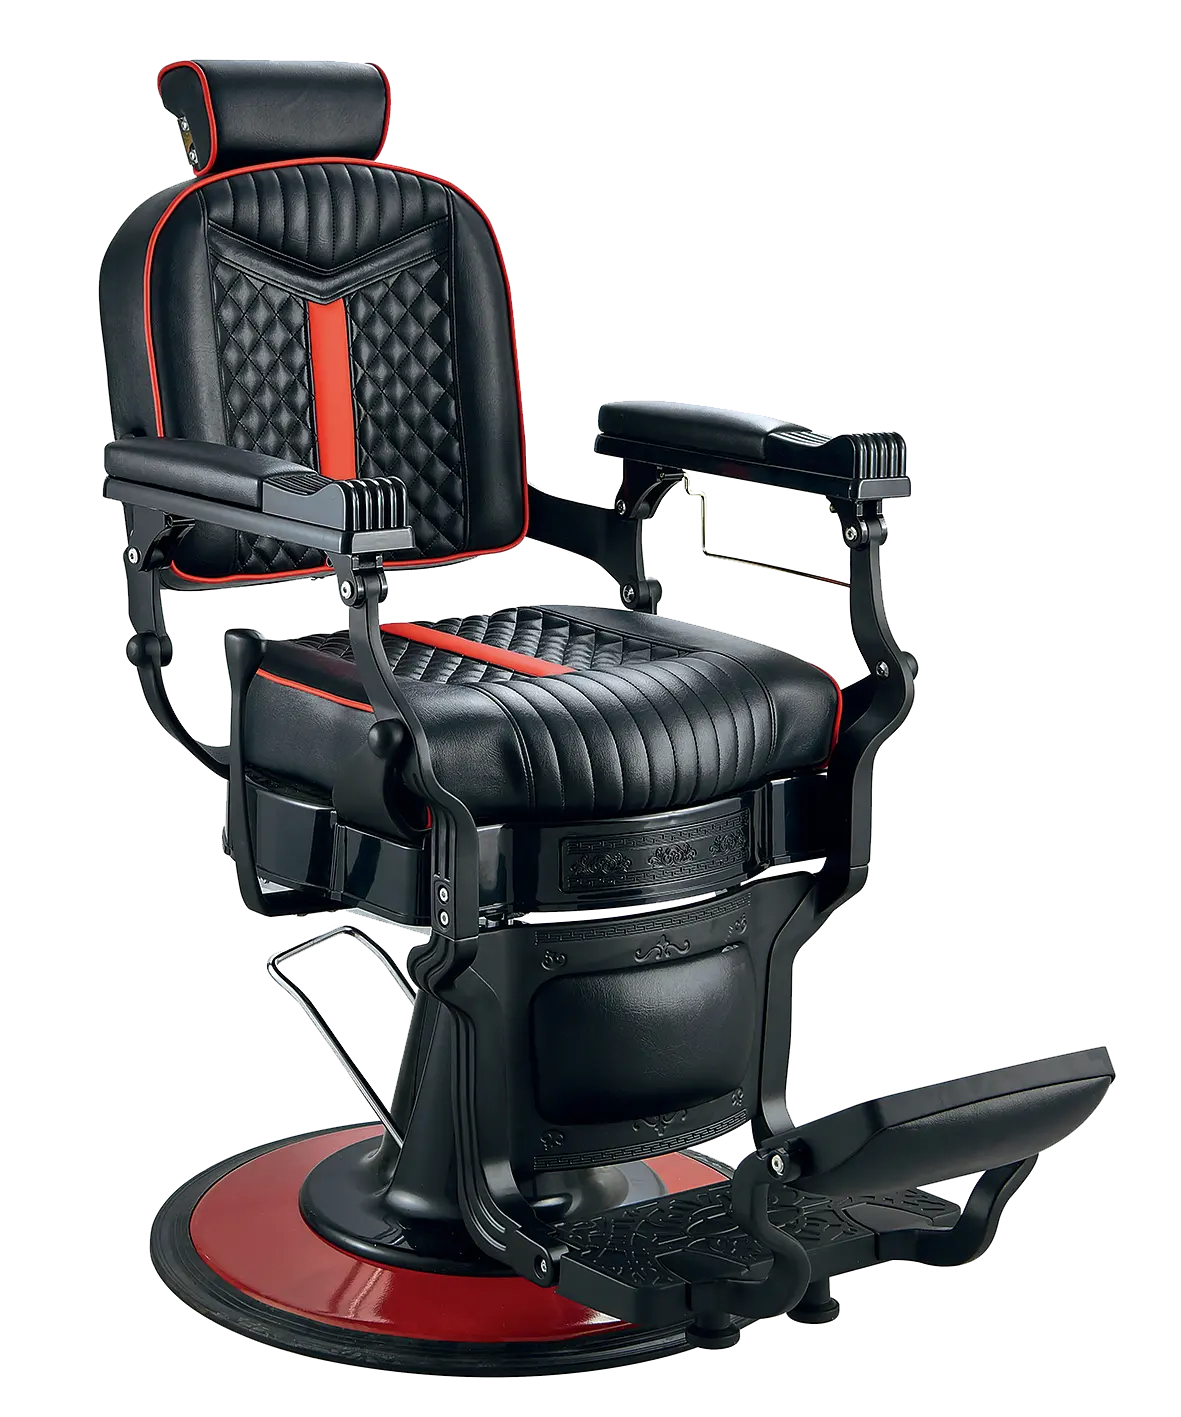 Salon Equipment Aluminum Mobile Washing Hair Barber Chair Black Square Seat Red Base Barber Chair